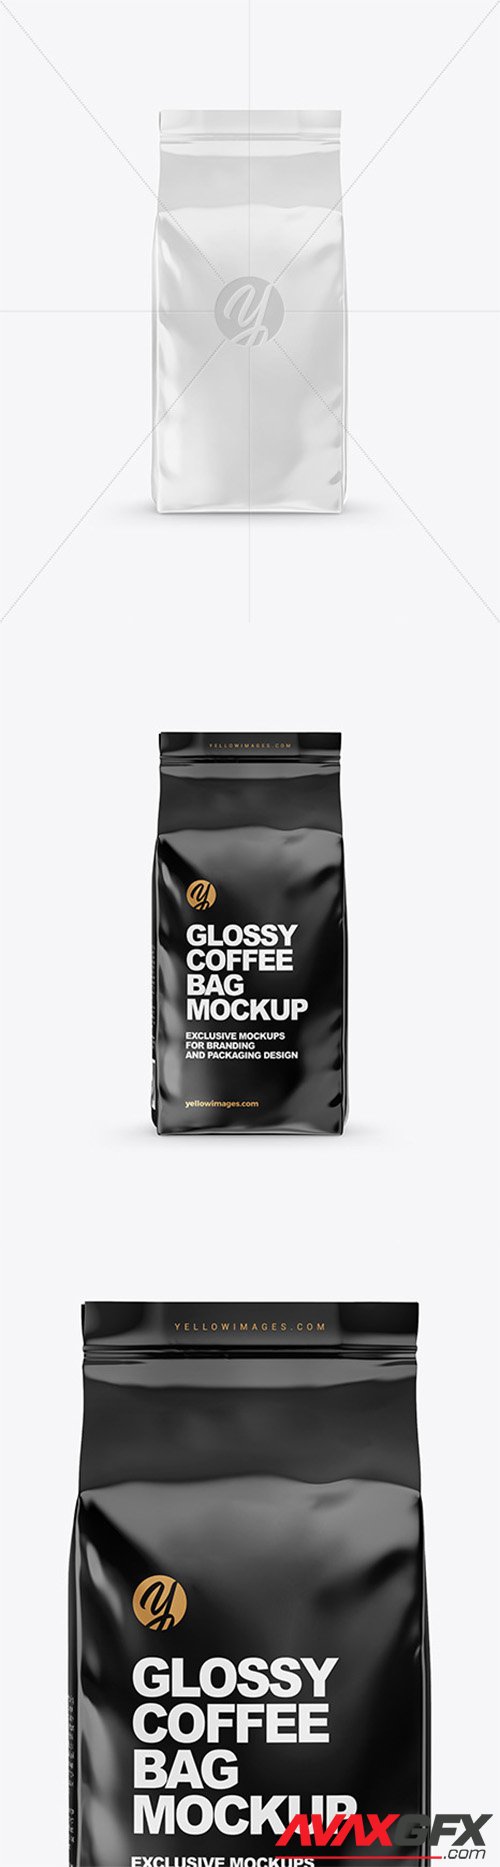 Download Glossy Coffee Bag Mockup 61229 Avaxgfx All Downloads That You Need In One Place Graphic From Nitroflare Rapidgator PSD Mockup Templates